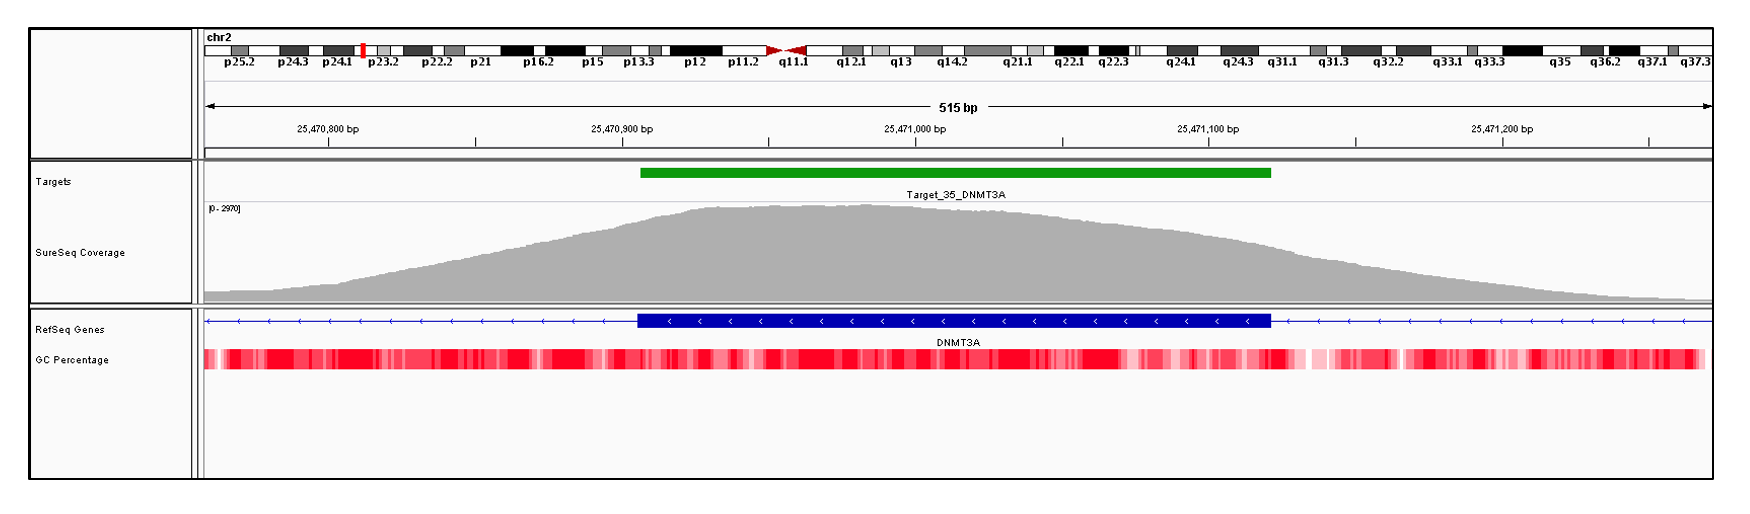 DNMT3A Exon 7 (hg19 chr2:25470906-25471121). Depth of coverage per base (grey). Targeted region (green). Gene coding region as defined by RefSeq (blue). GC percentage (red). Image